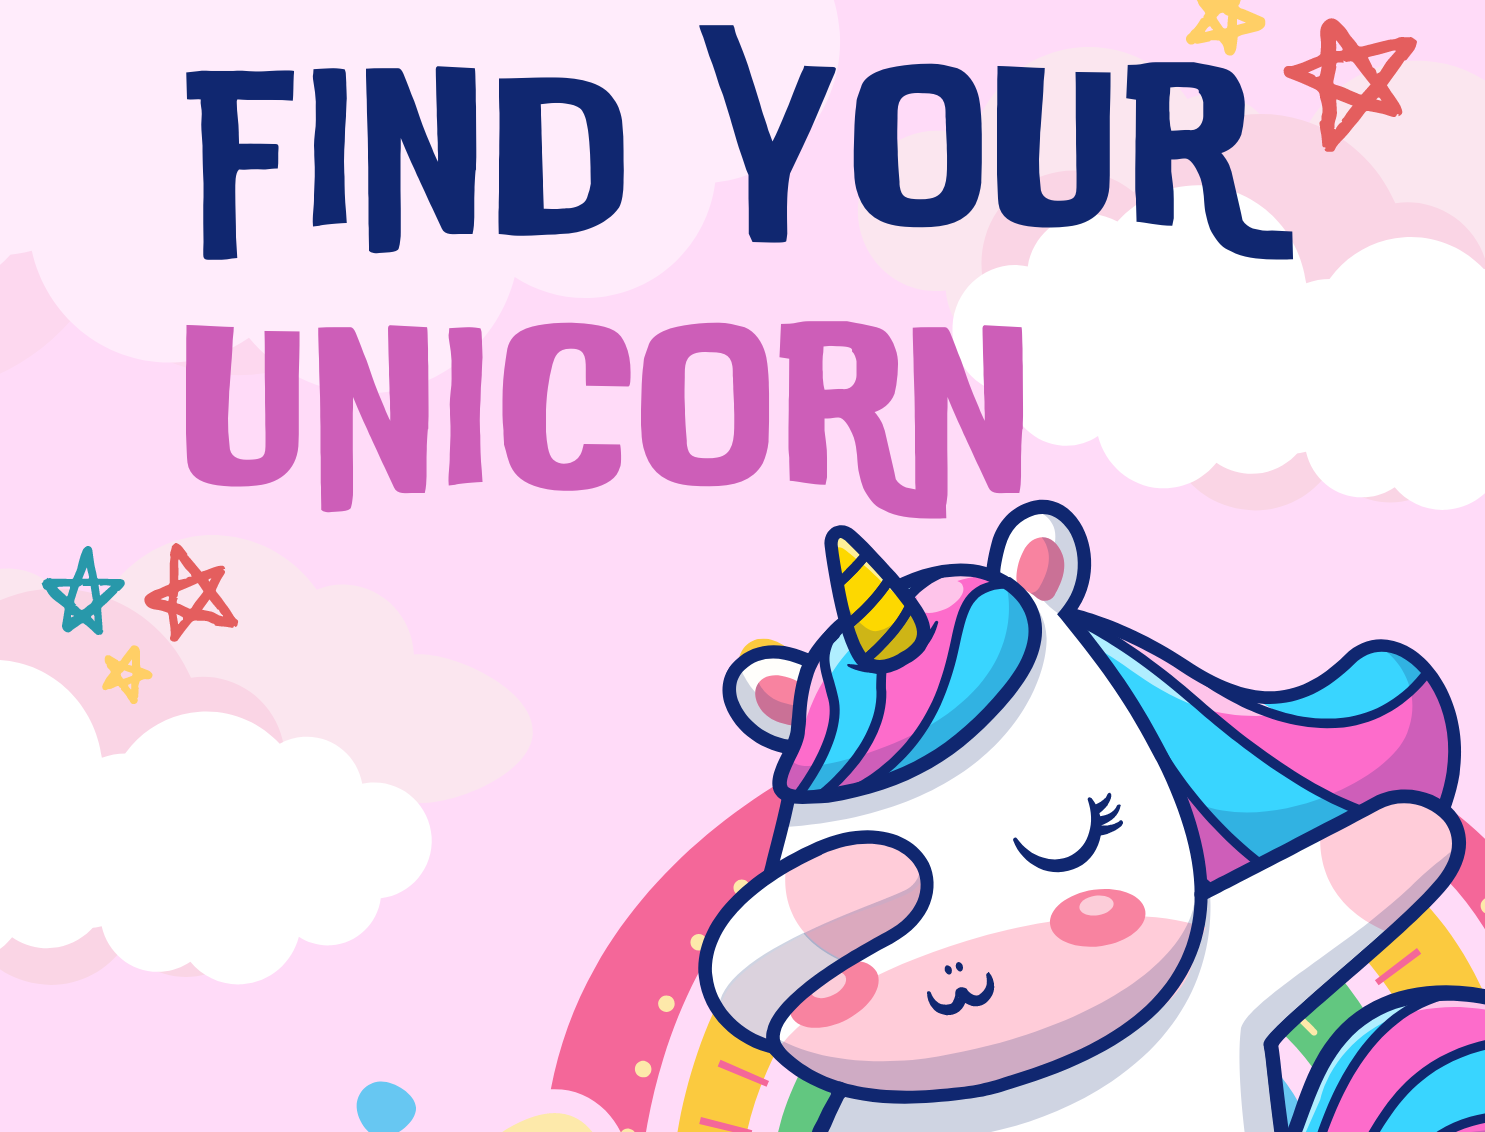 Pink background with clouds and stars, with text "Find Your Unicorn," and a white unicorn with rainbow hair dabbing.